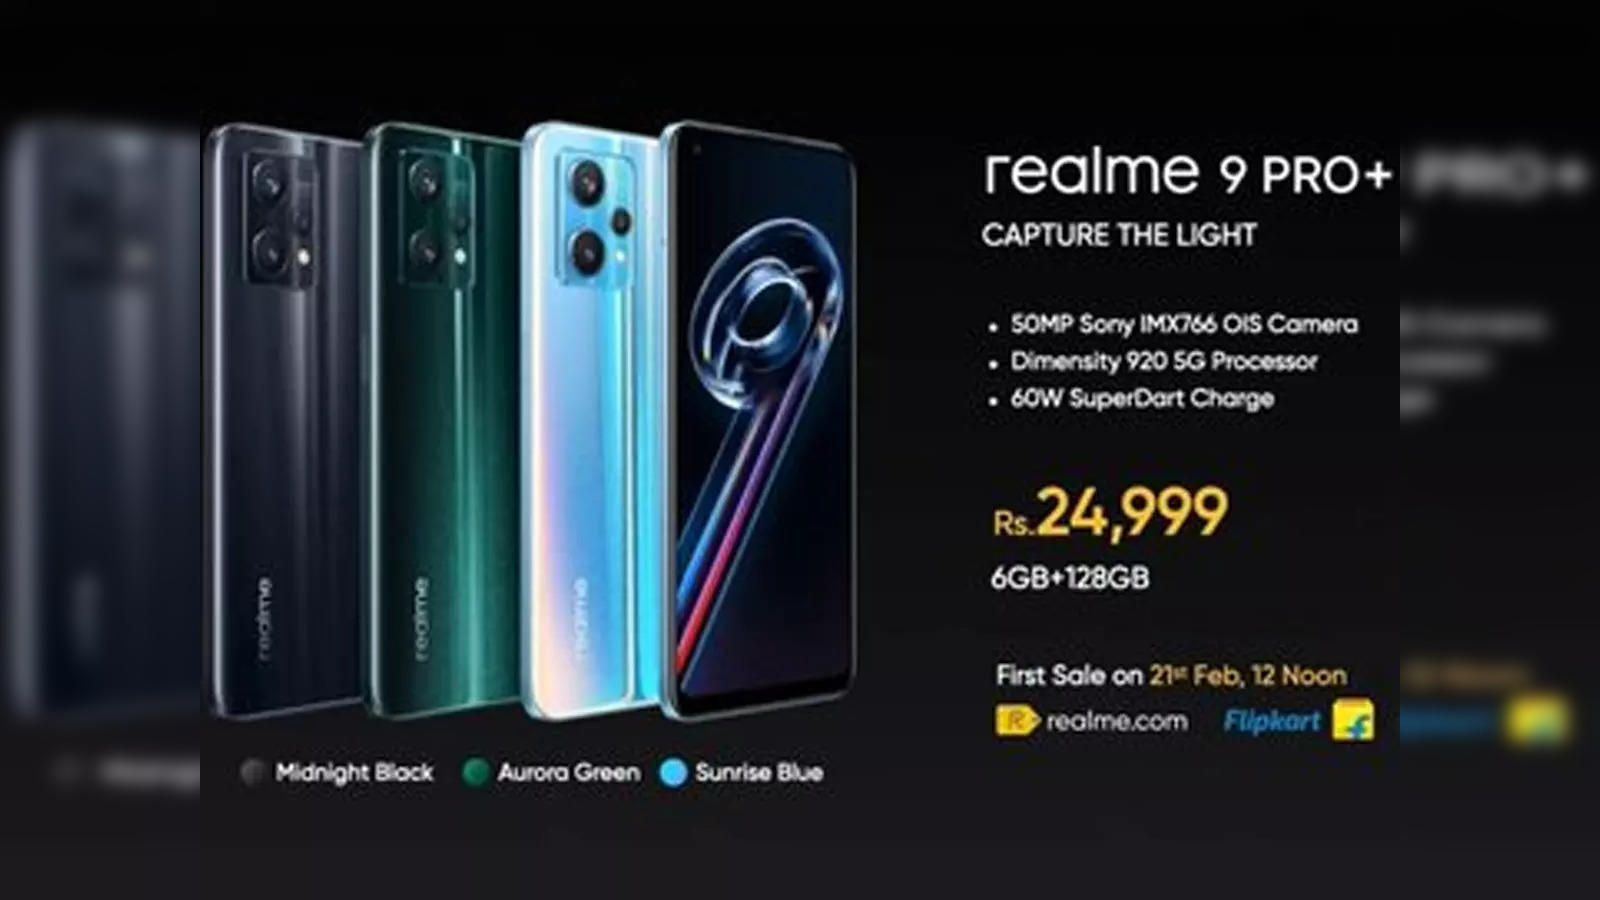 realme 9 pro+: Realme launches 9 Pro+ & 9 Pro: Here are price details, sale  date & and discount offer - The Economic Times